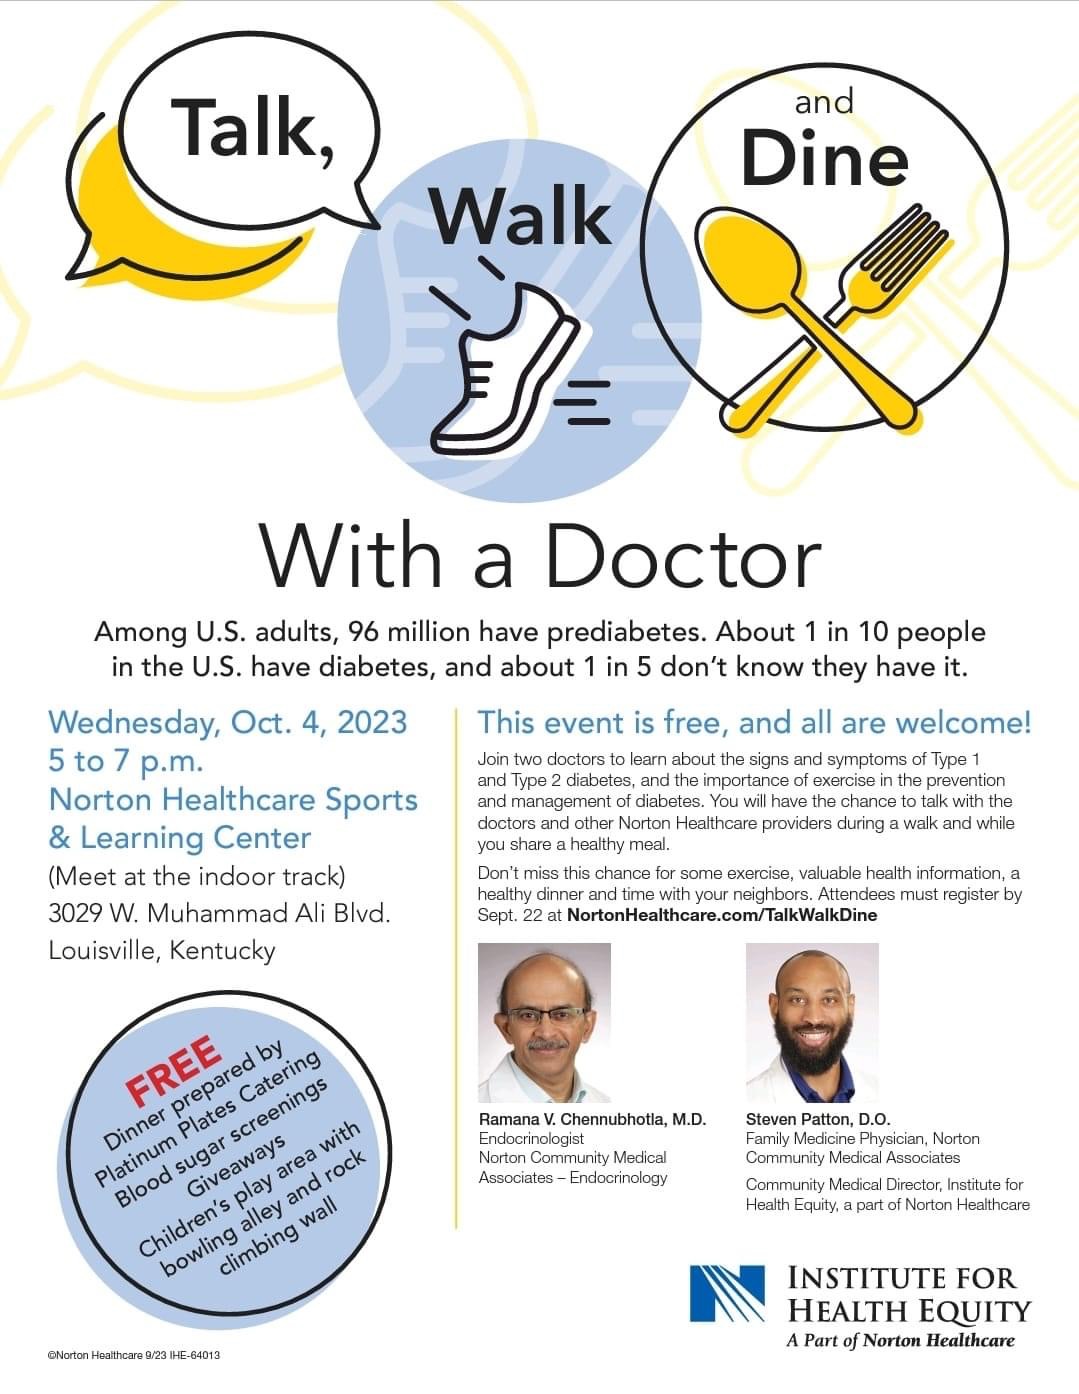 <h1 class="tribe-events-single-event-title">Talk, Walk & Dine With a Doc</h1>